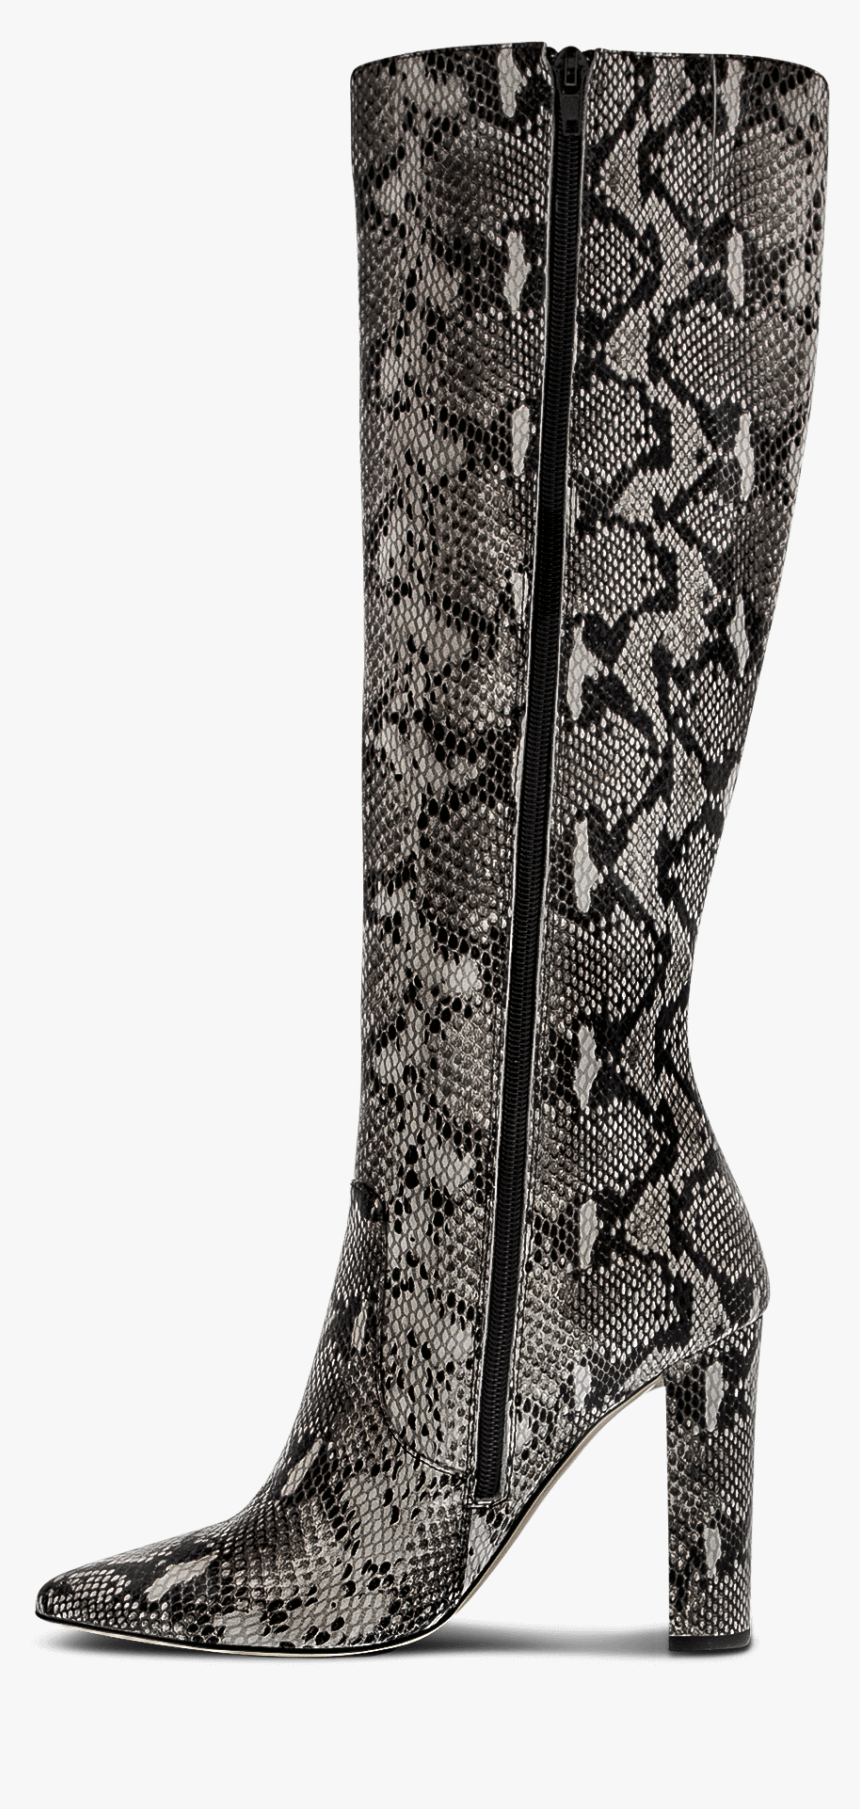 Knee-high Boot, HD Png Download, Free Download